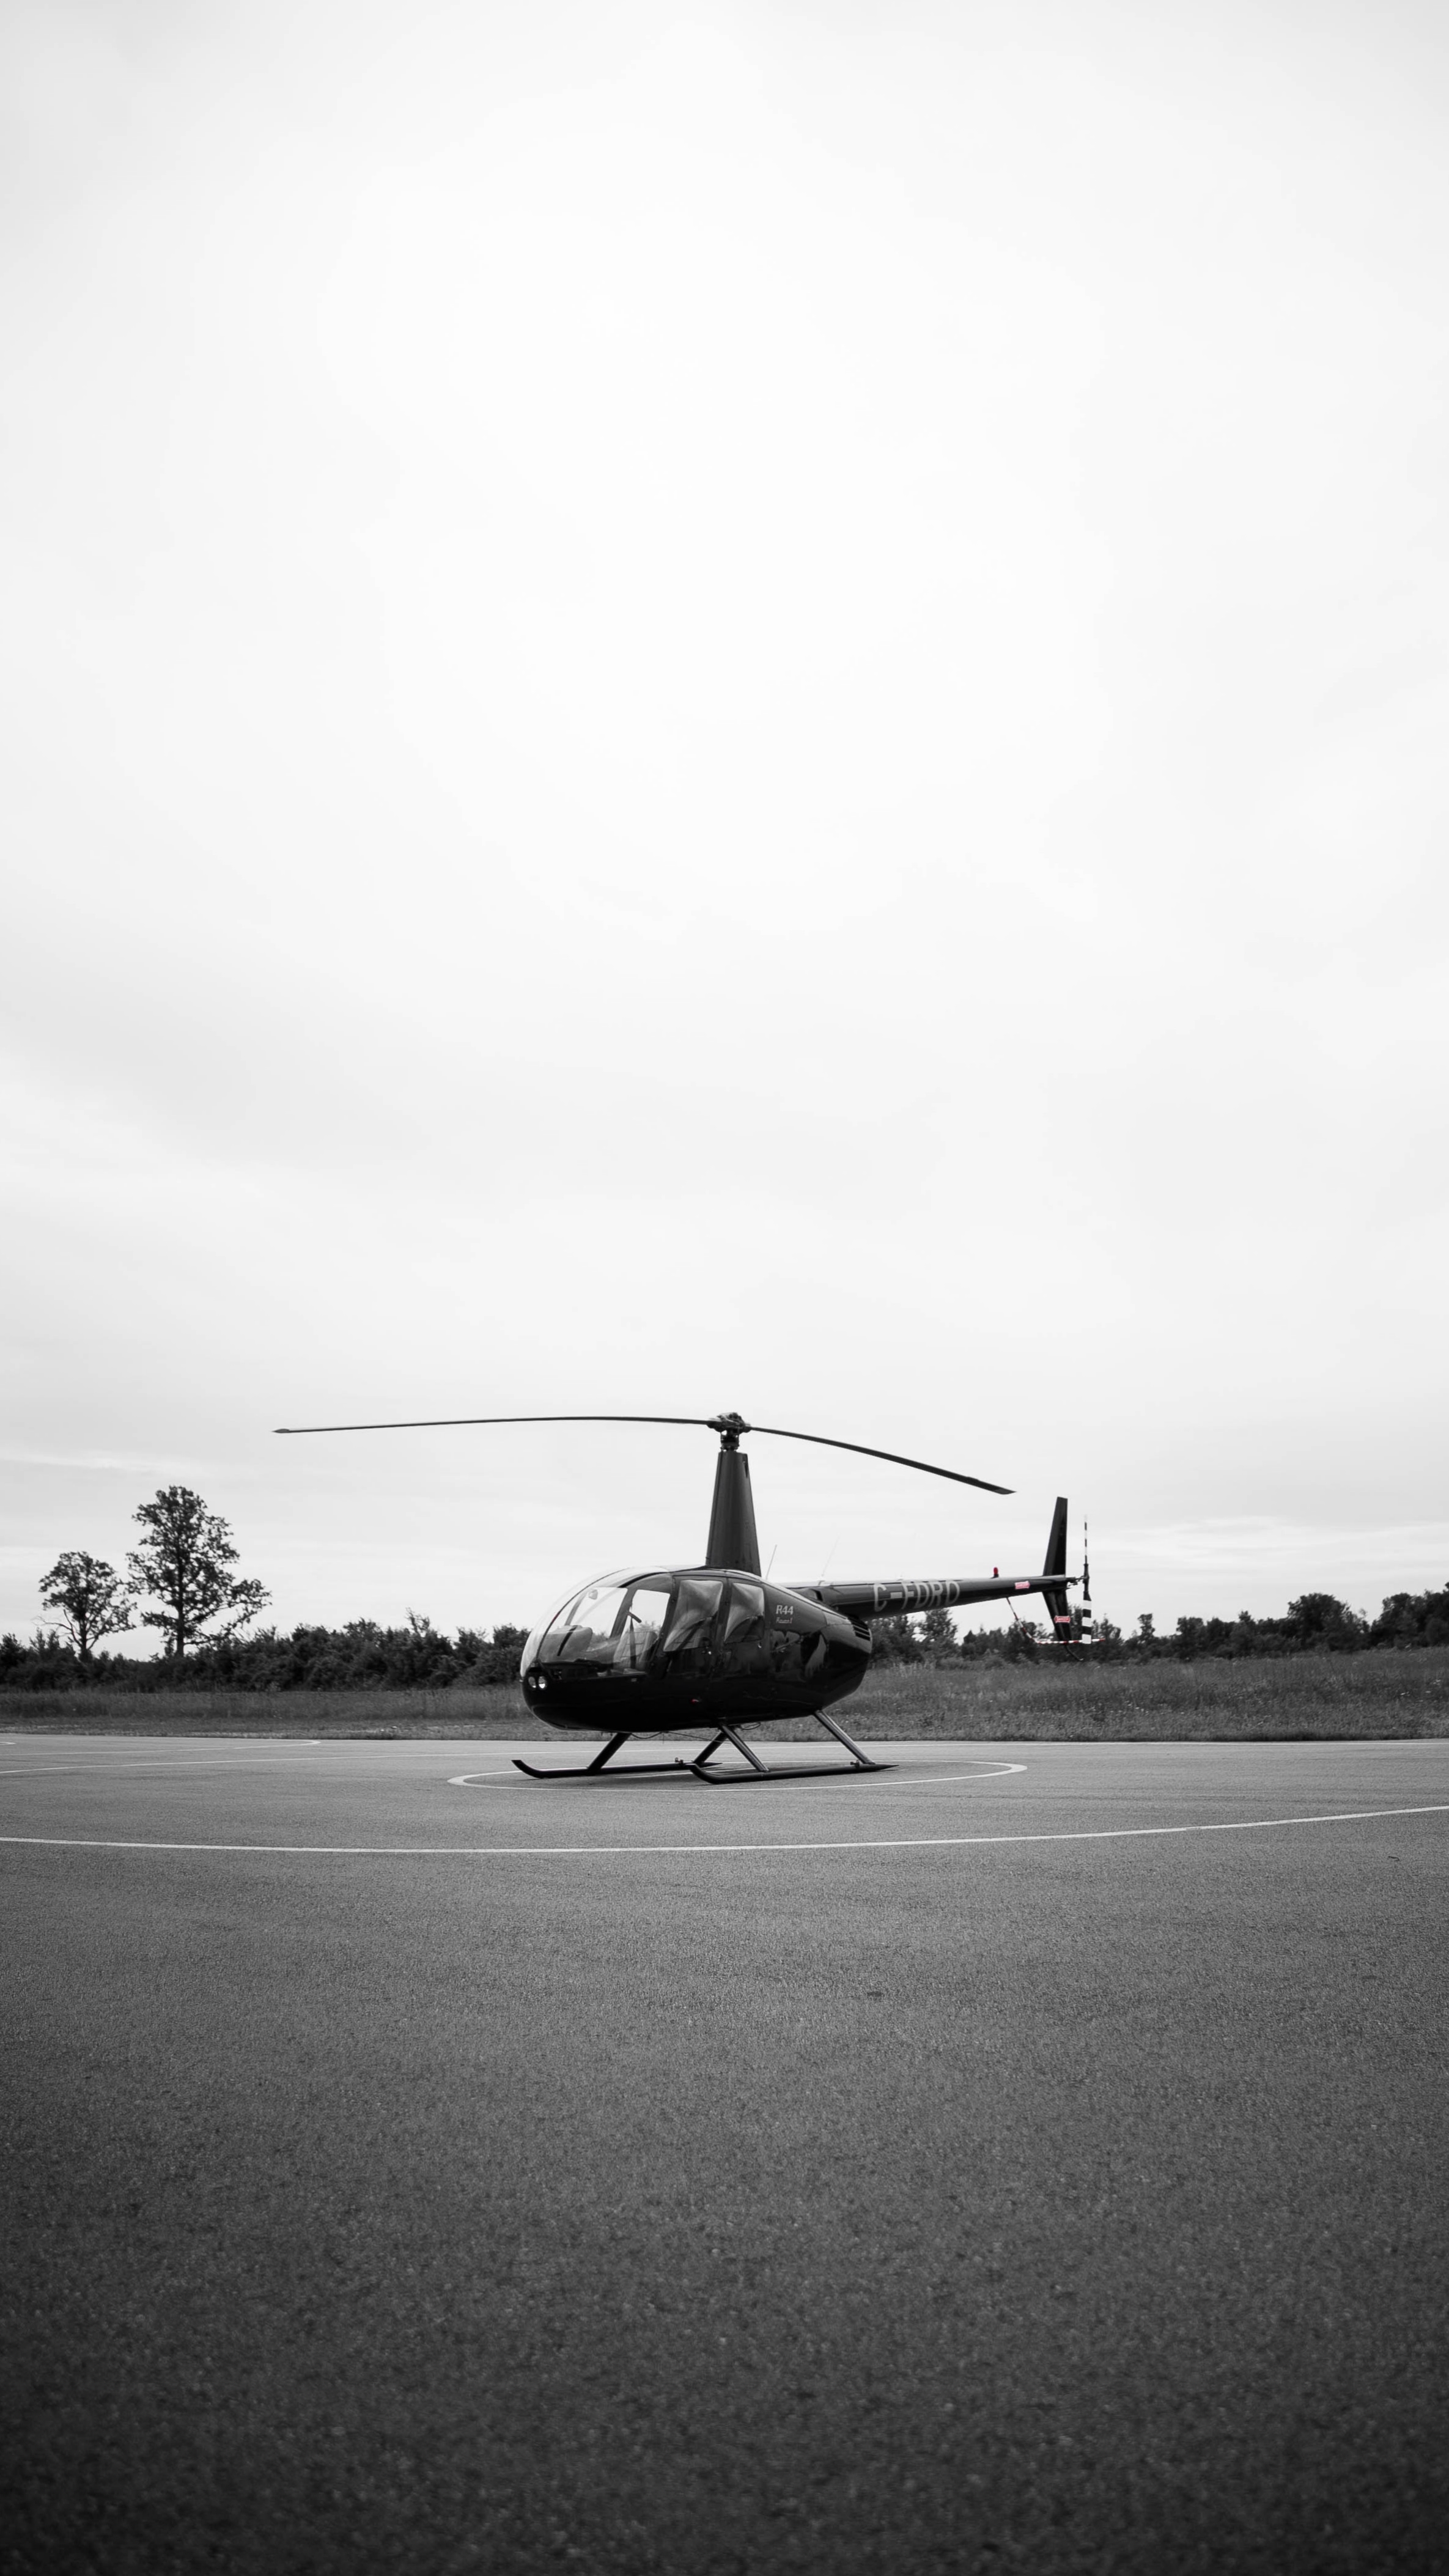 bw, miscellanea, miscellaneous, playground, platform, chb, helicopter, blades, air transport